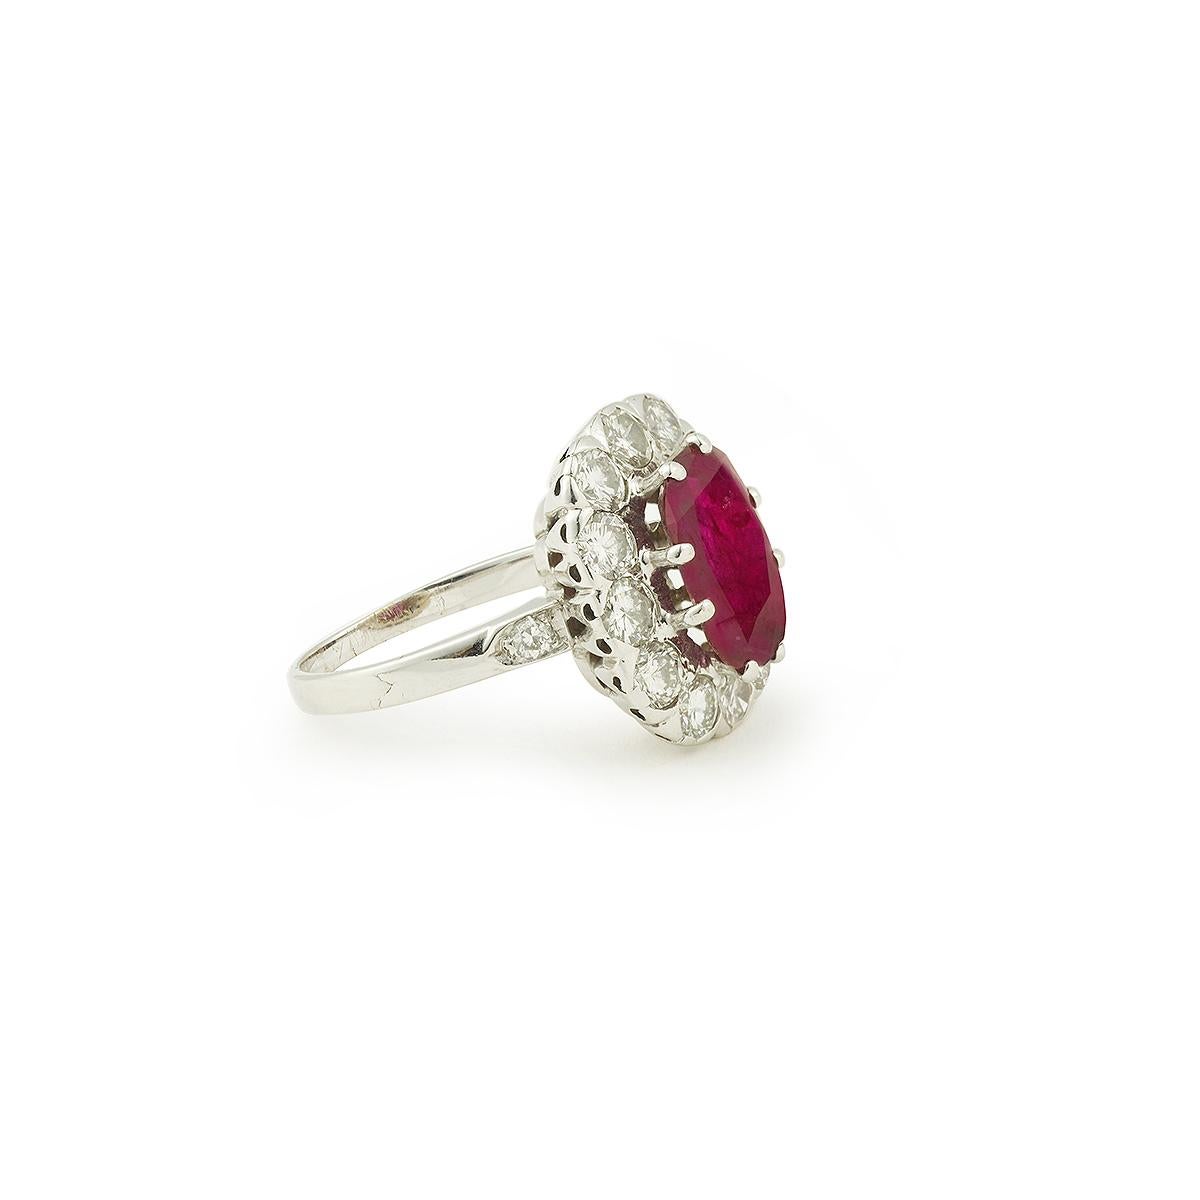 A fine vintage 18 K white gold so called “Pompadour” ring with a central cushion cut ruby, surrounded by 12 round cut diamonds 

Ruby's Weight approx: 3.20 carats
With certificate from Gem Paris specifying of his origin, his weight and